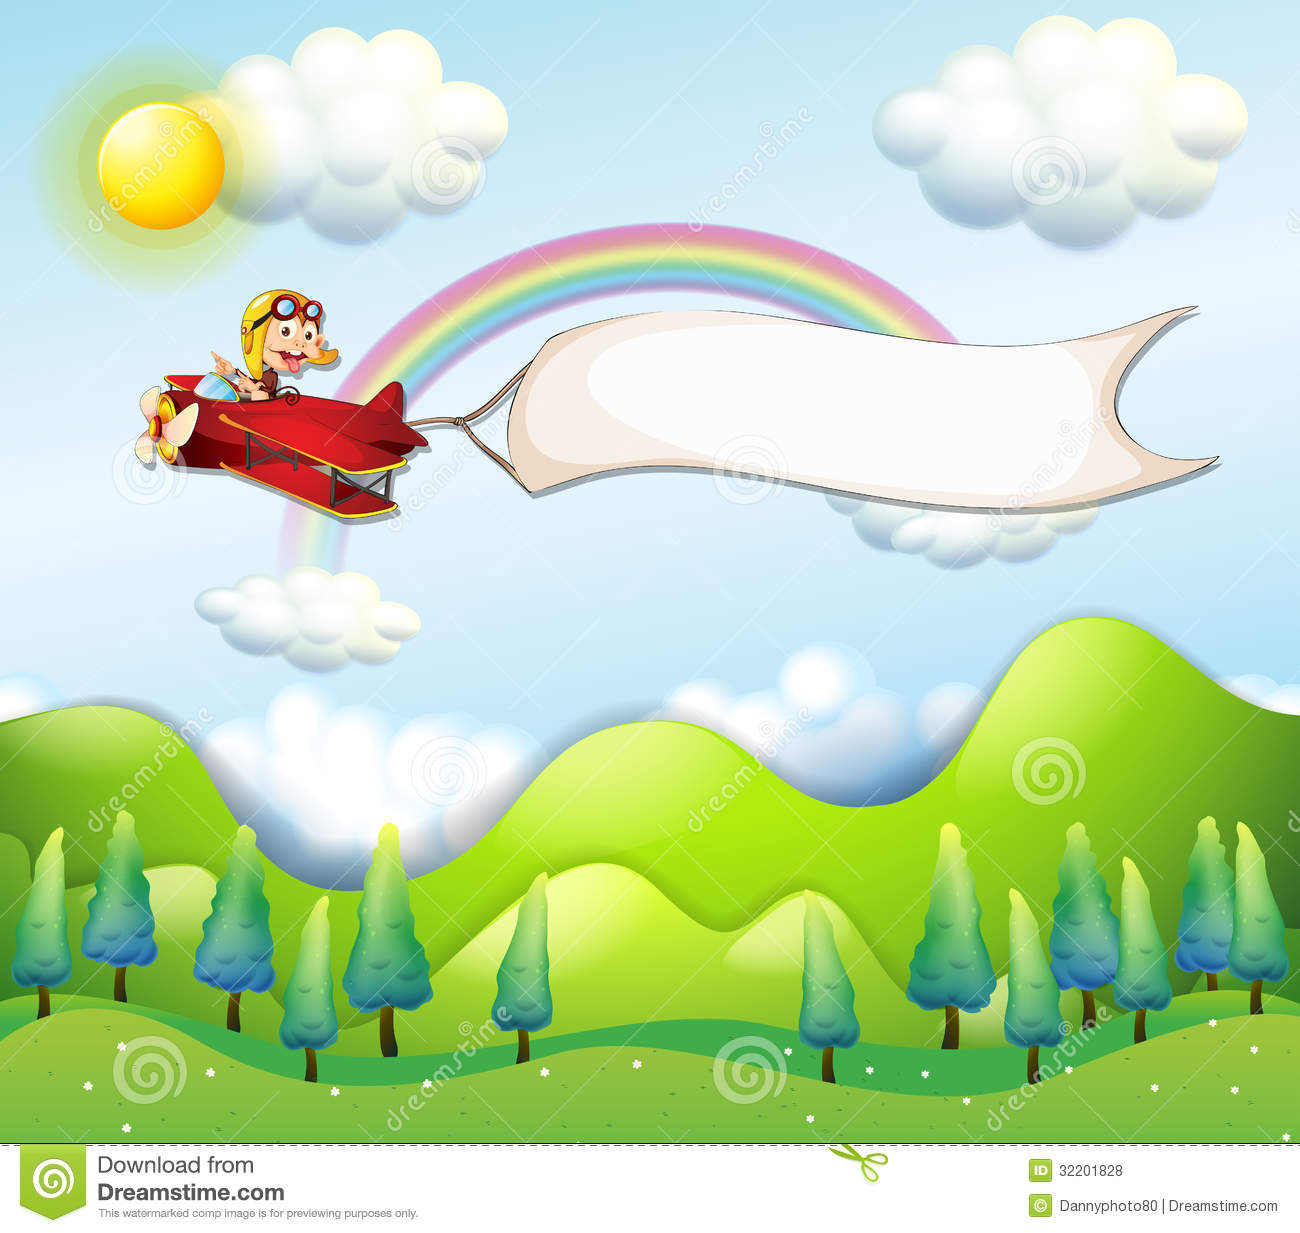 Airplane With Banner Clipart.